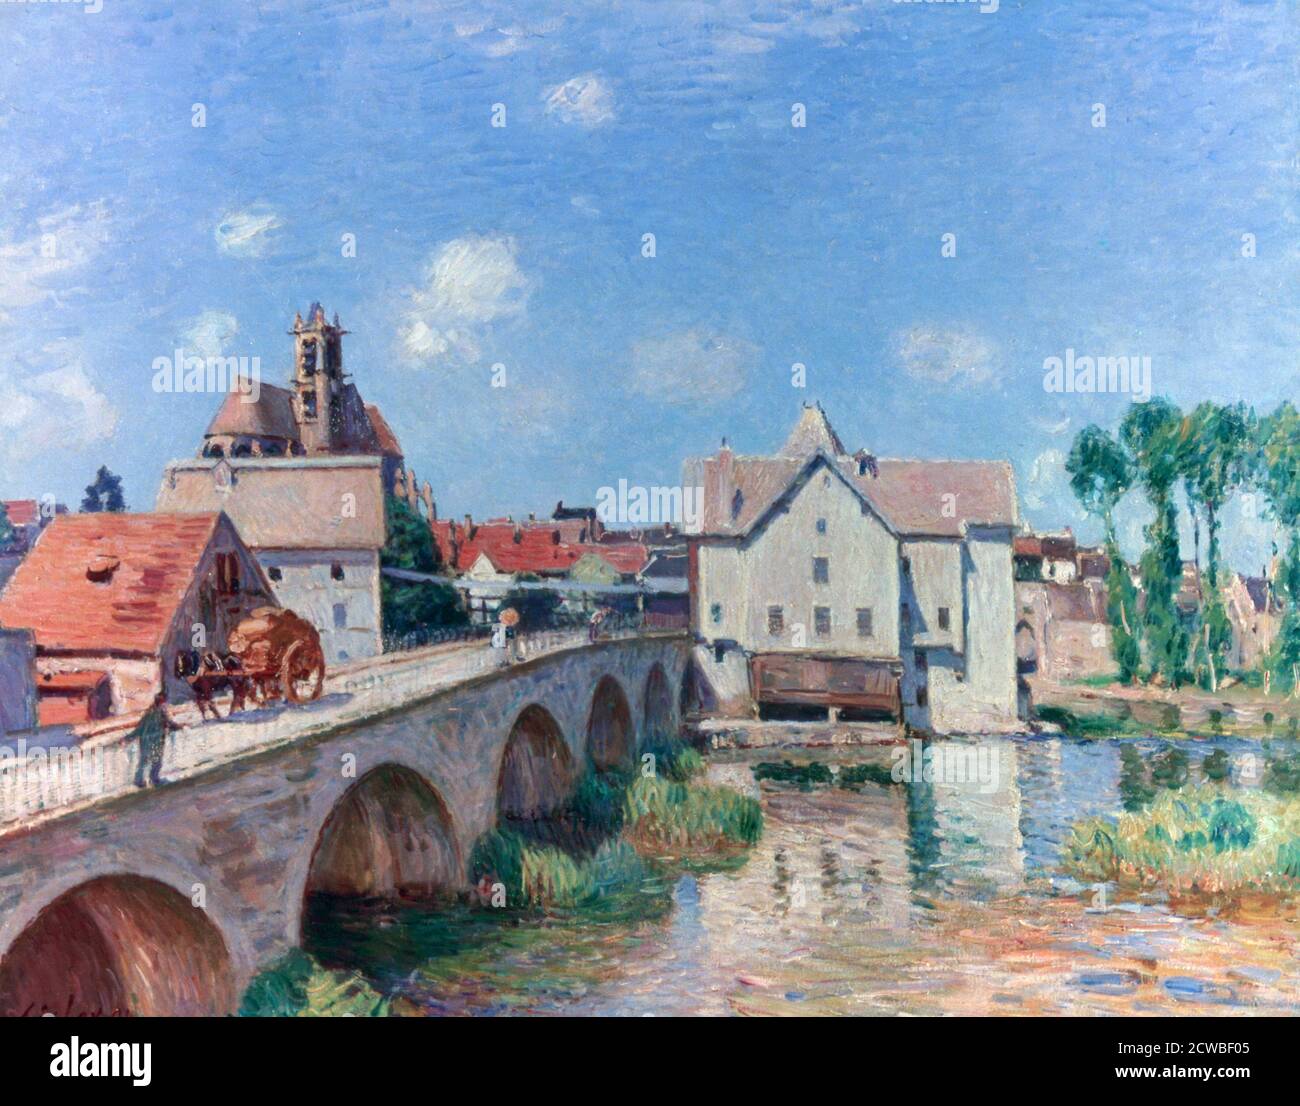 The Bridge at Moret', 1893. Artist: Alfred Sisley. Alfred Sisley was a French-born British painter and founding member of Impressionism. Stock Photo